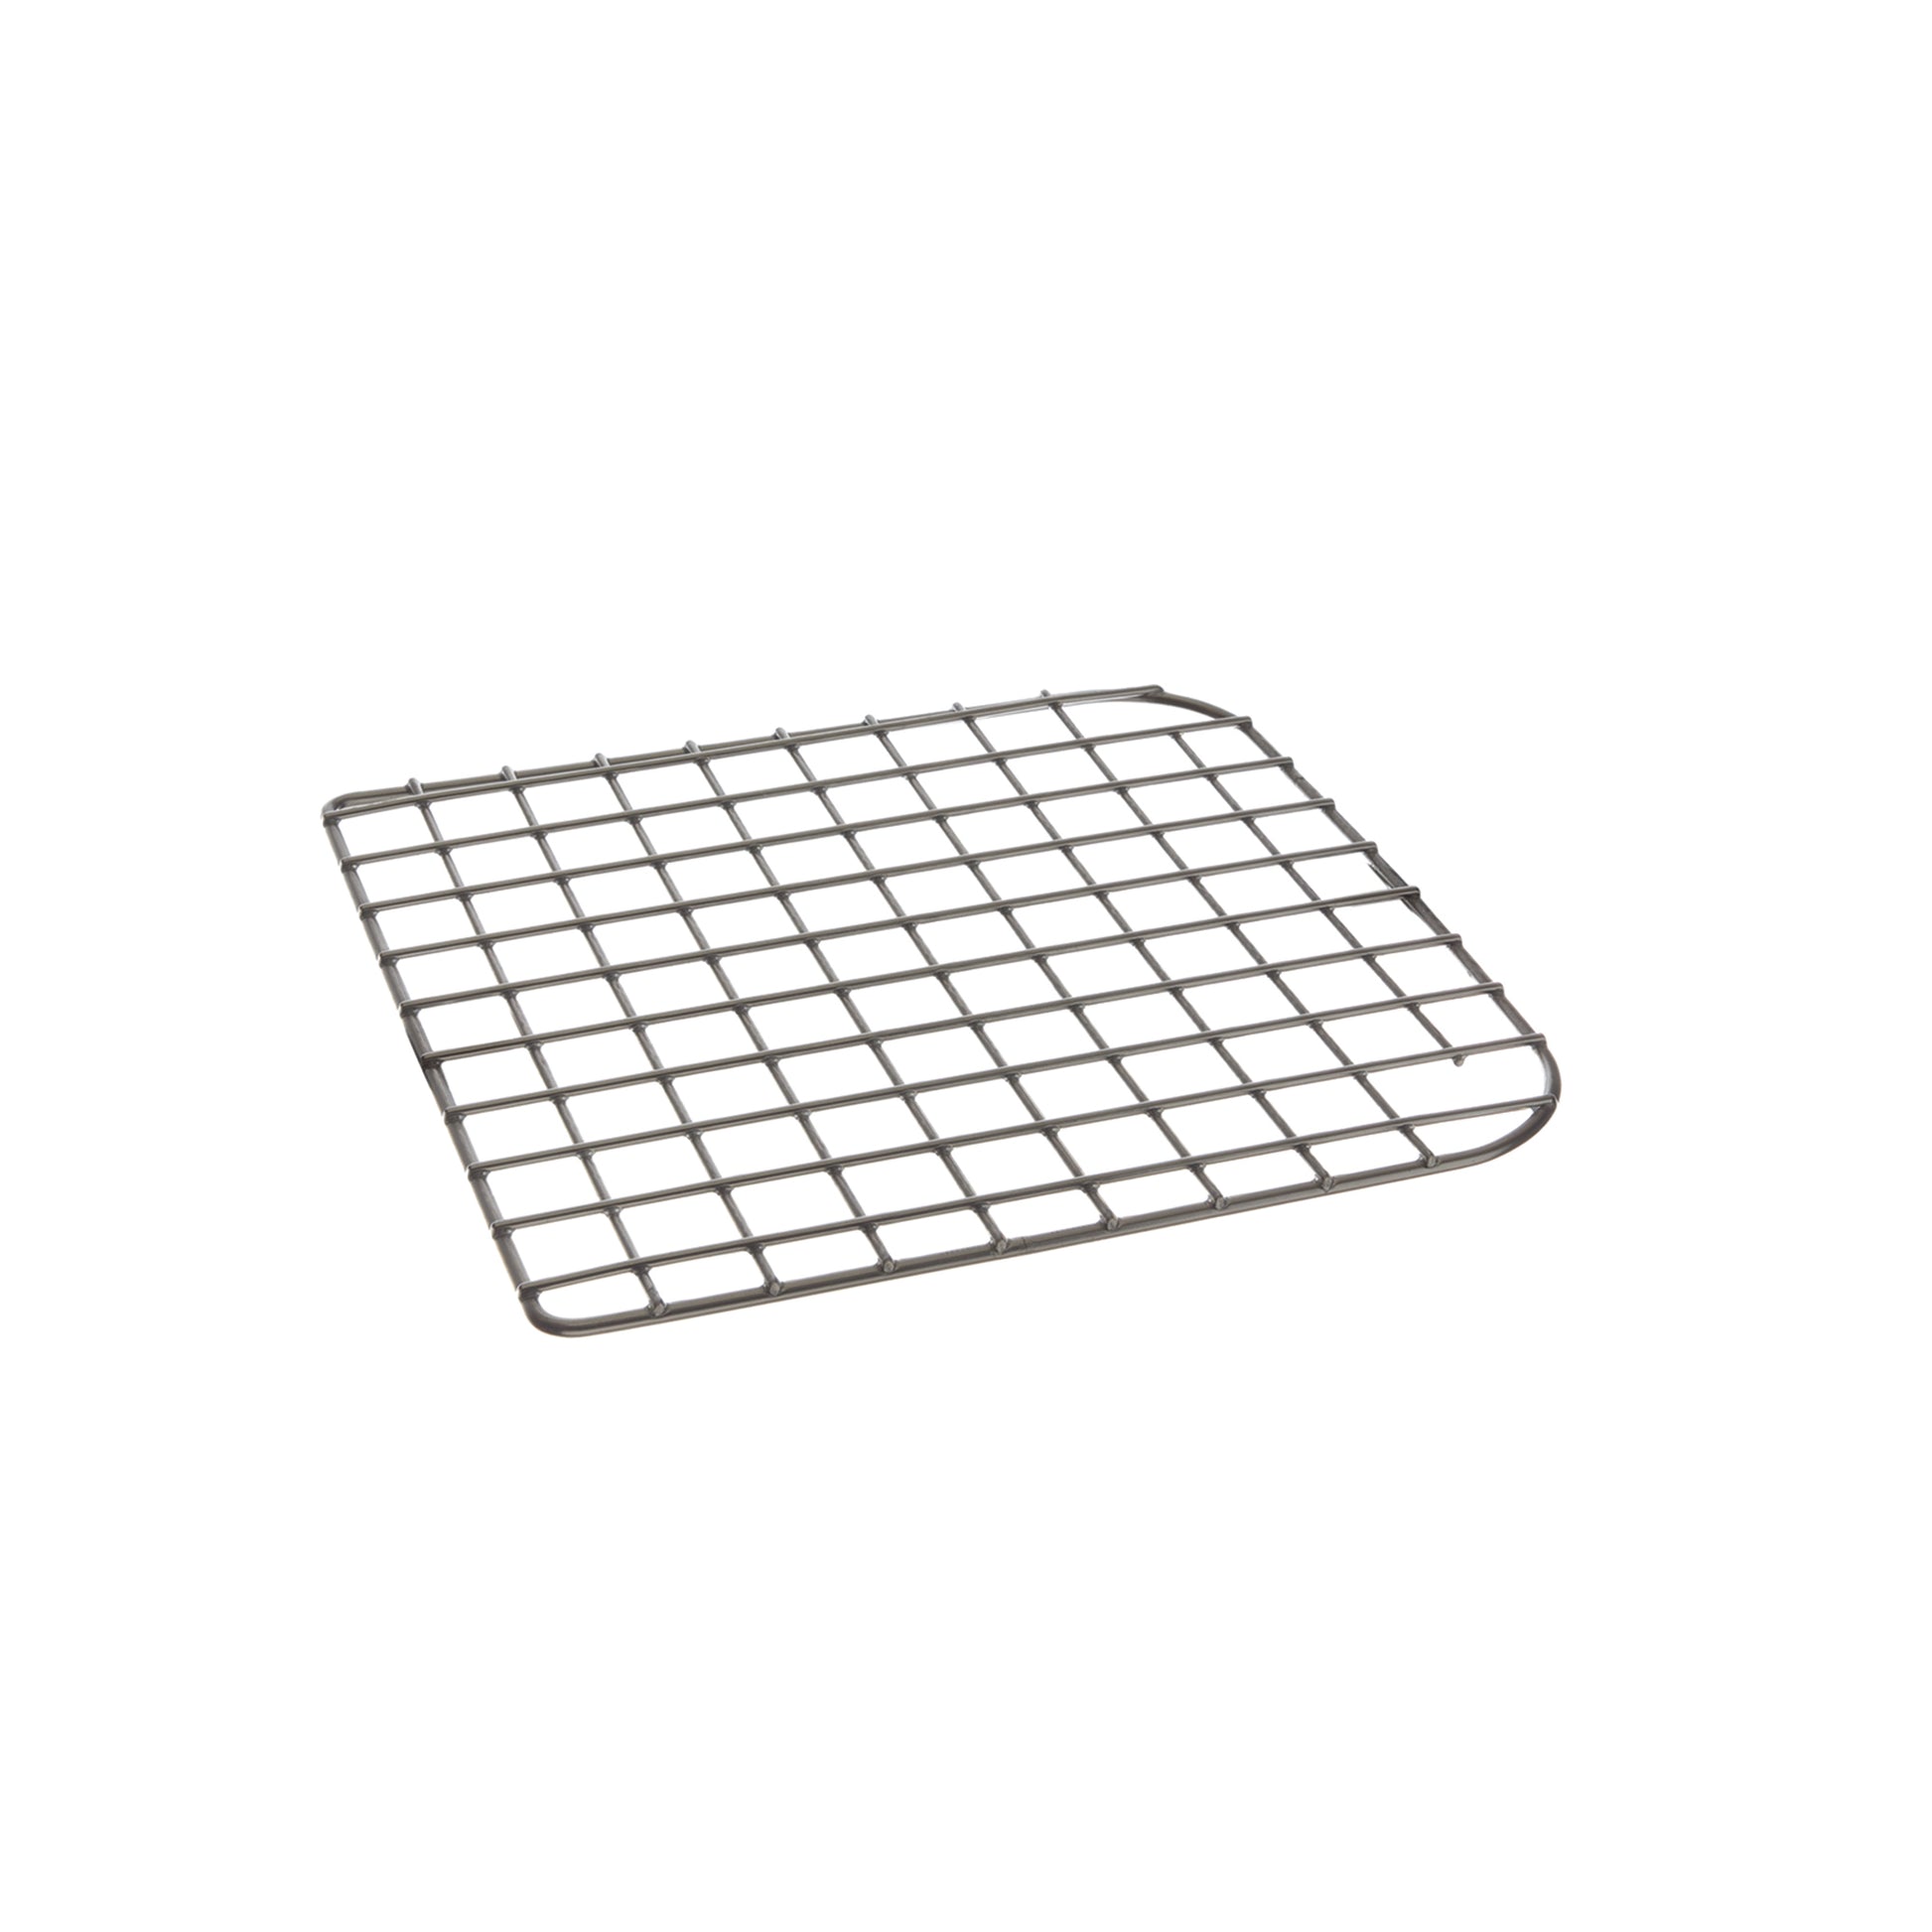 FRANKE OK-31C-RH 13.2-in. x 13.3-in. Stainless Steel Shelf Grid for Orca ORK110WH Sink In Stainless Steel